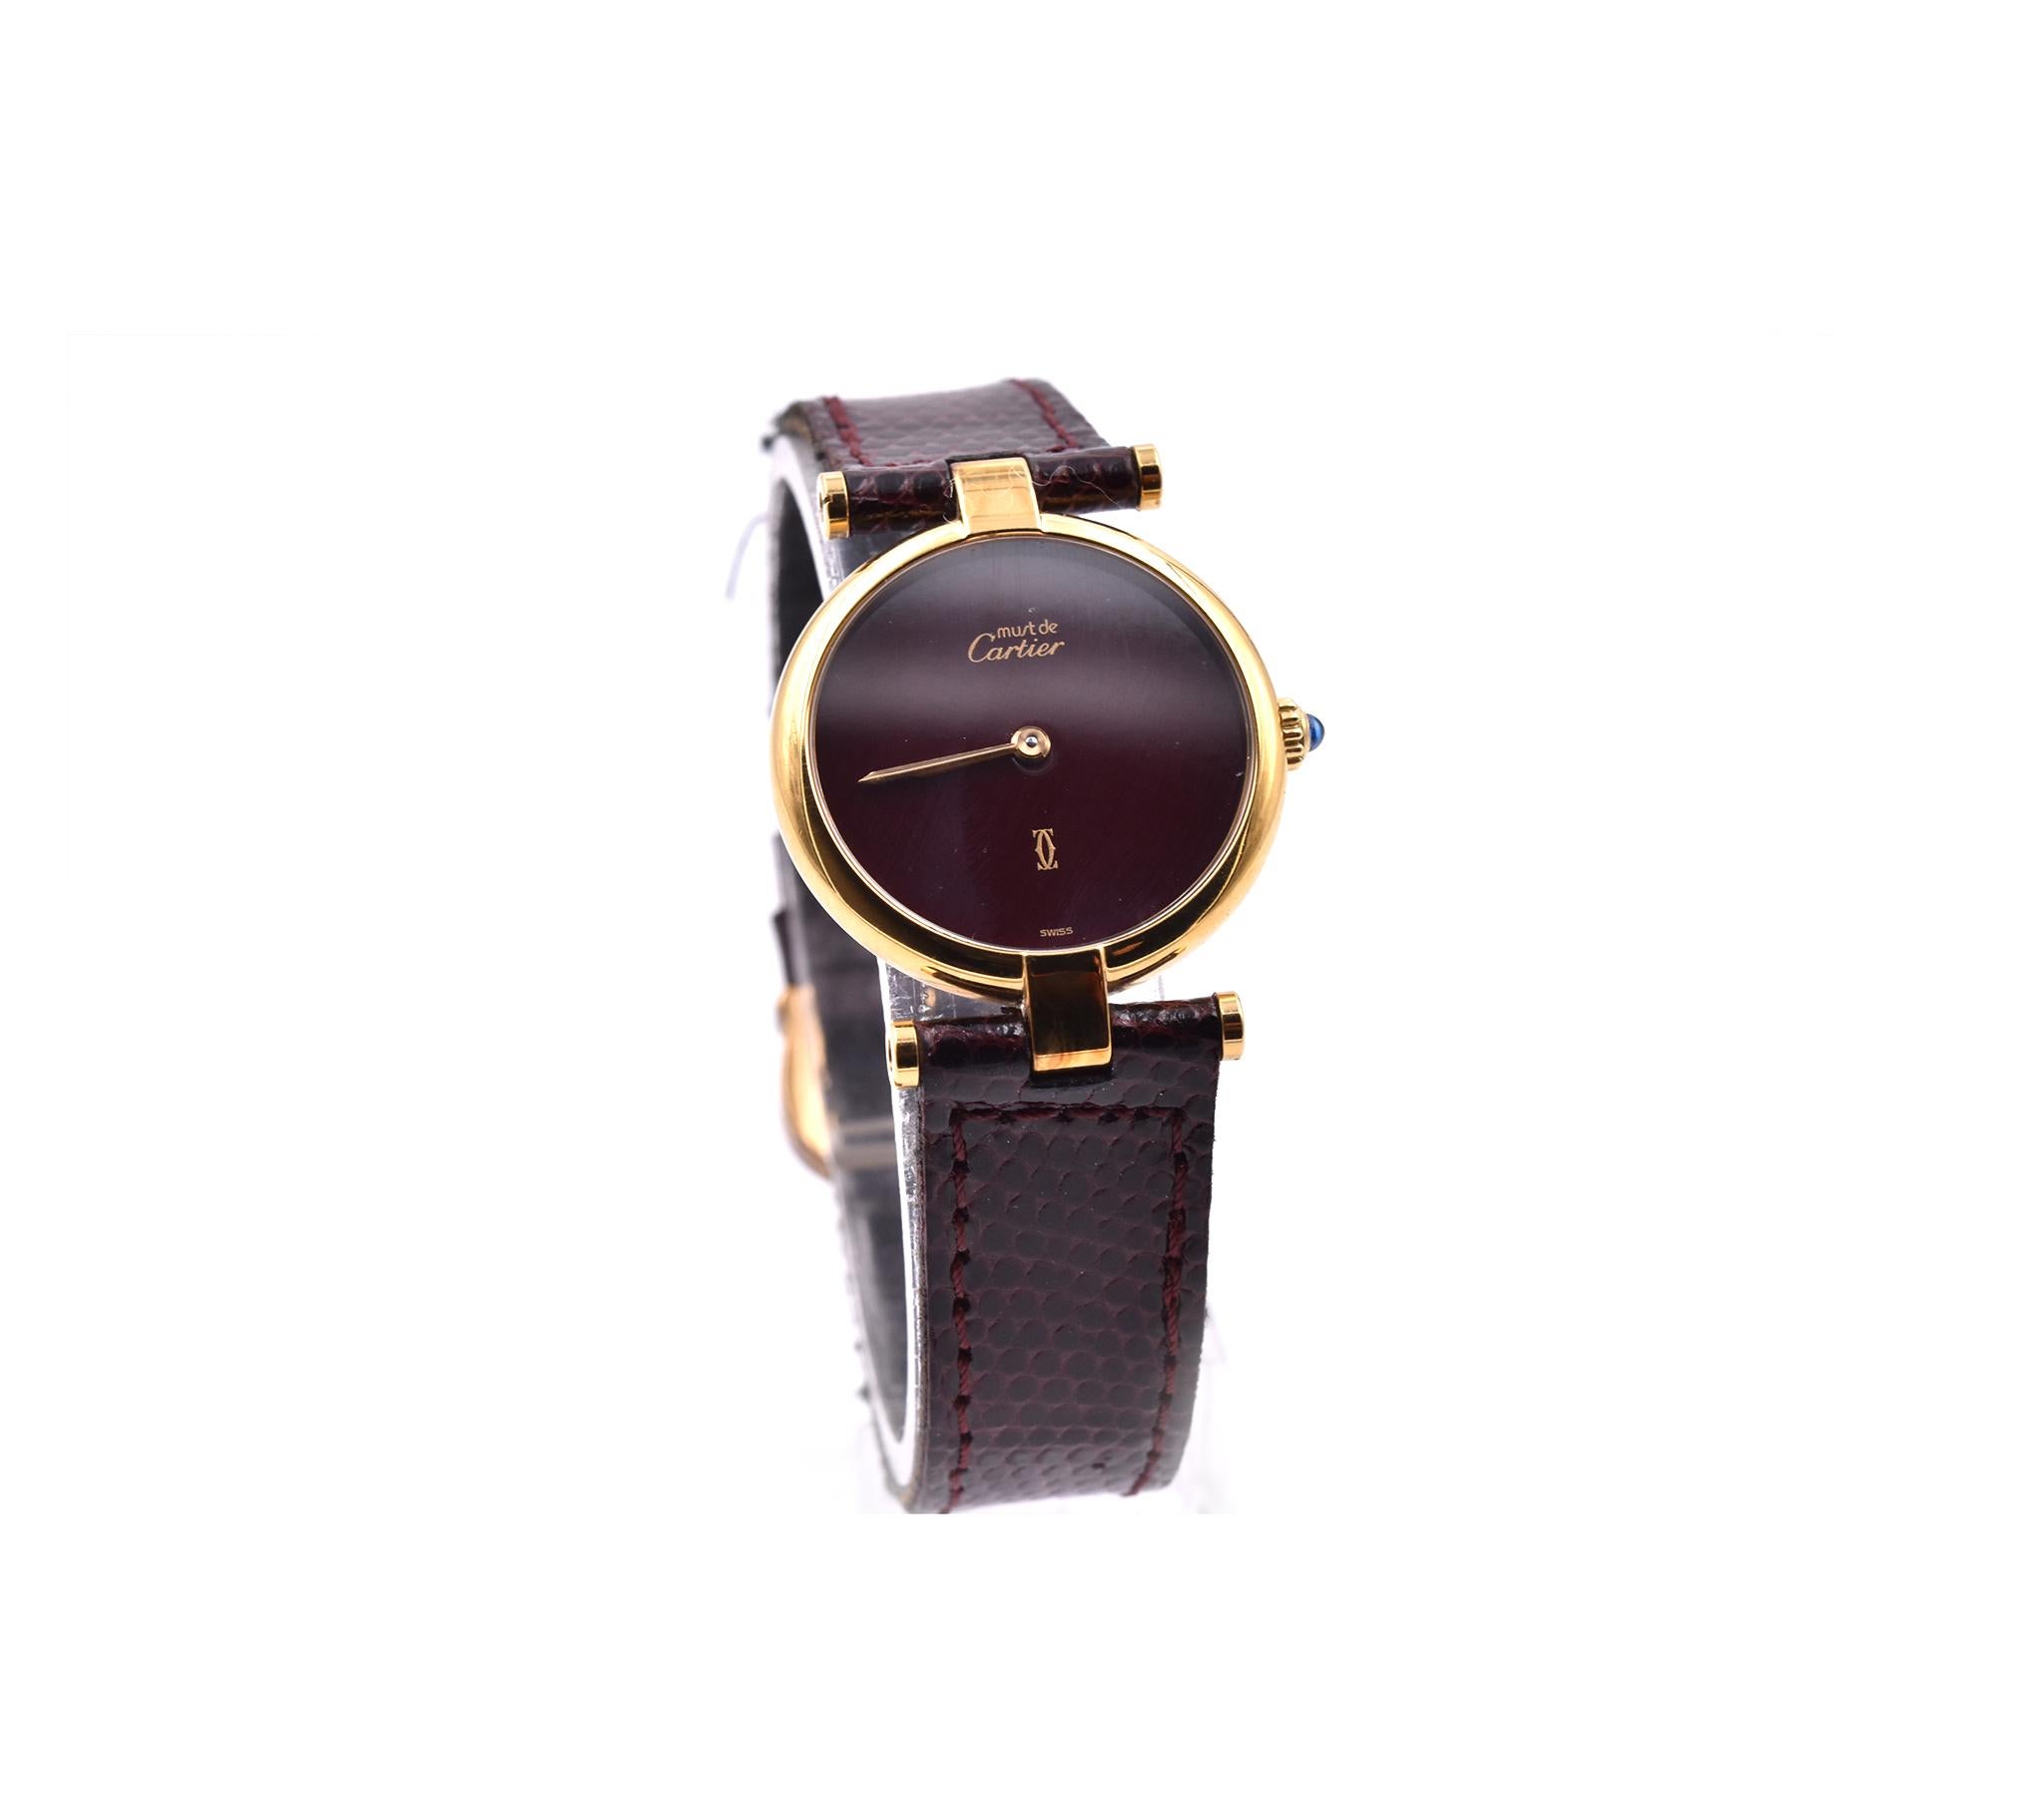 Movement: quartz
Function: hours, minutes
Case: 24mm vermeil yellow gold case 
Dial:  wine color dial, Roman numeral dial with gold hands
Band: black cherry lizard leather strap with tang buckle
Serial: 100XXX
Reference: Must de Cartier Argent